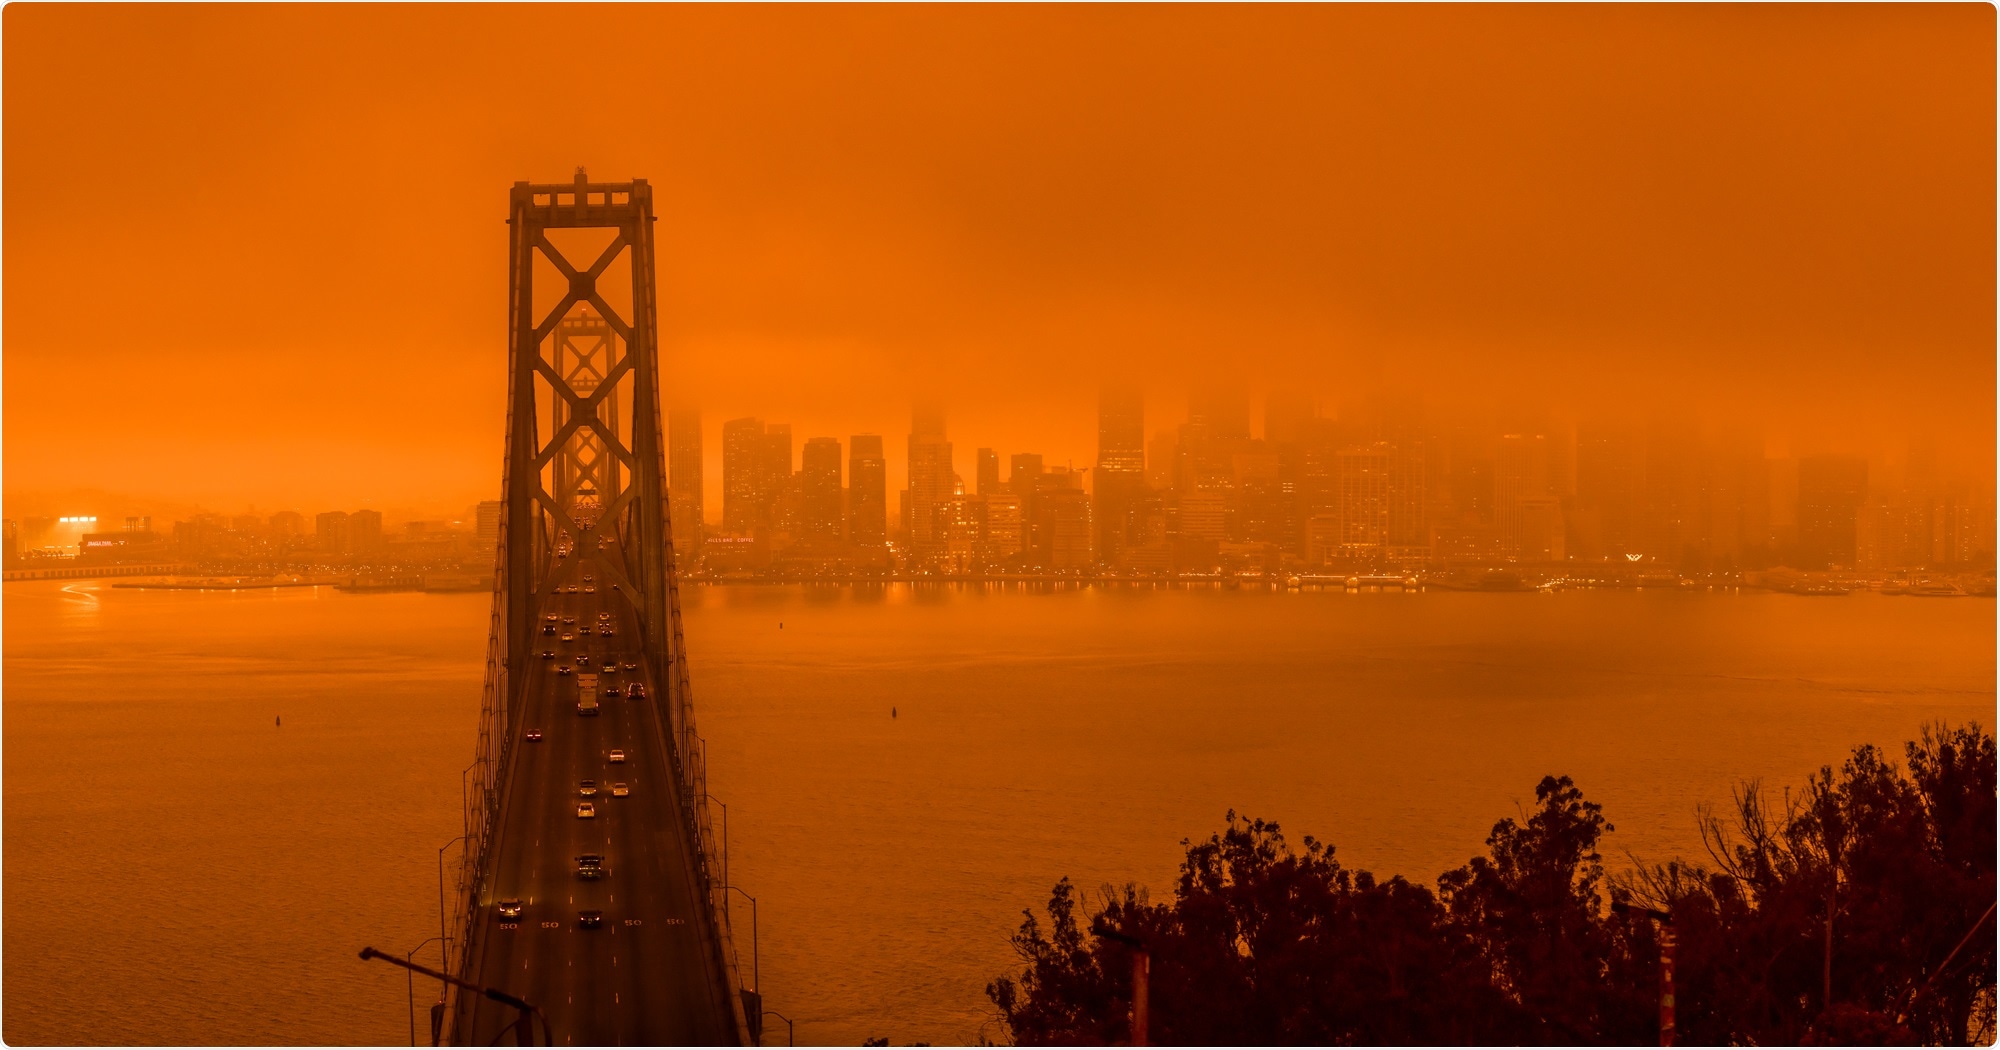 San Francisco, Ca. 09/09/2020 during the natural disaster of the wild fires. Image Credit: Photo_Time / Shutterstock